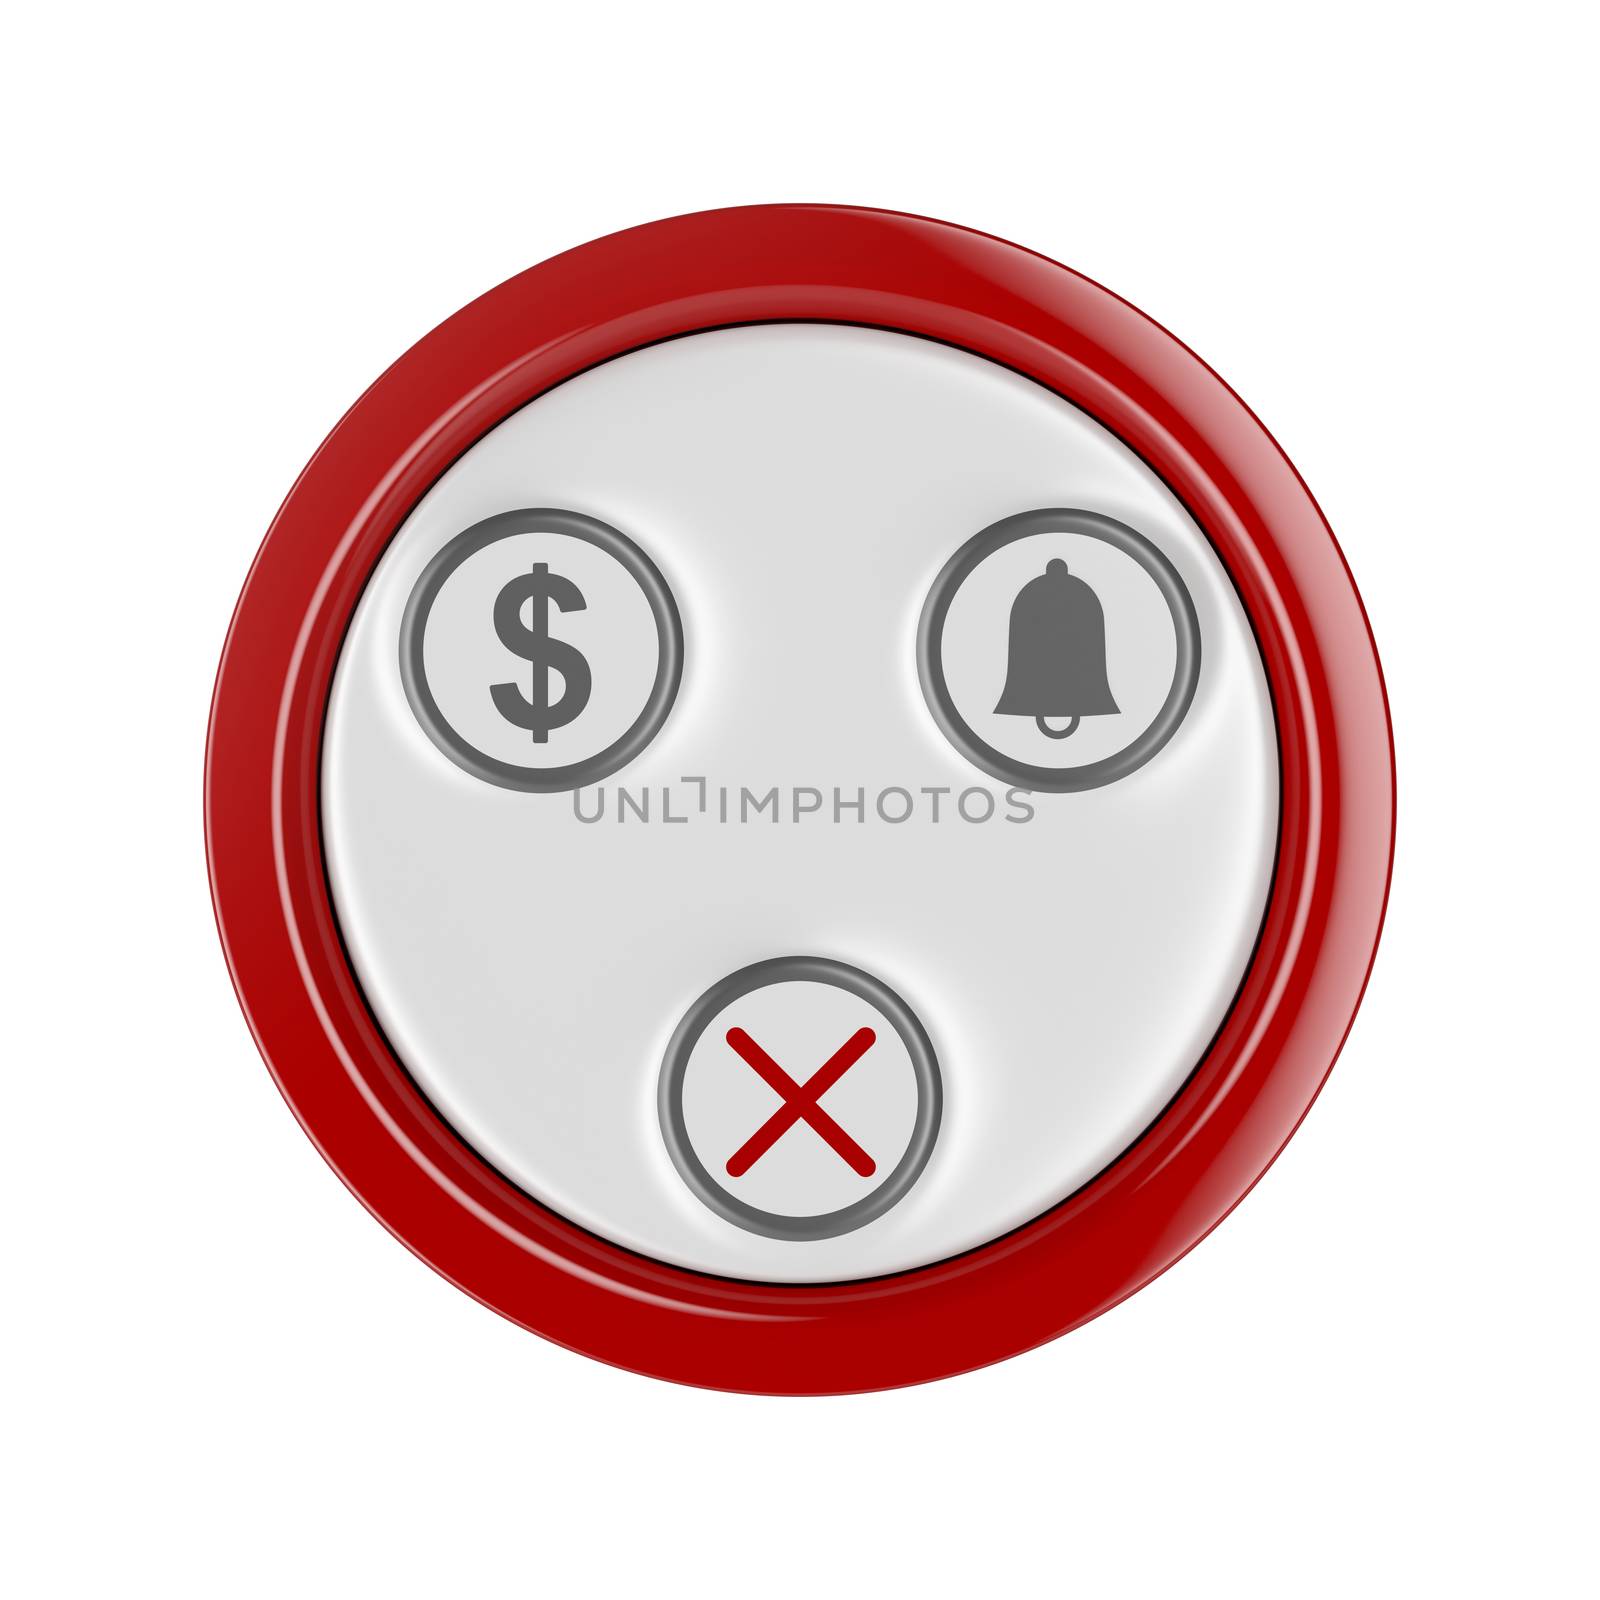 Restaurant table call button by magraphics